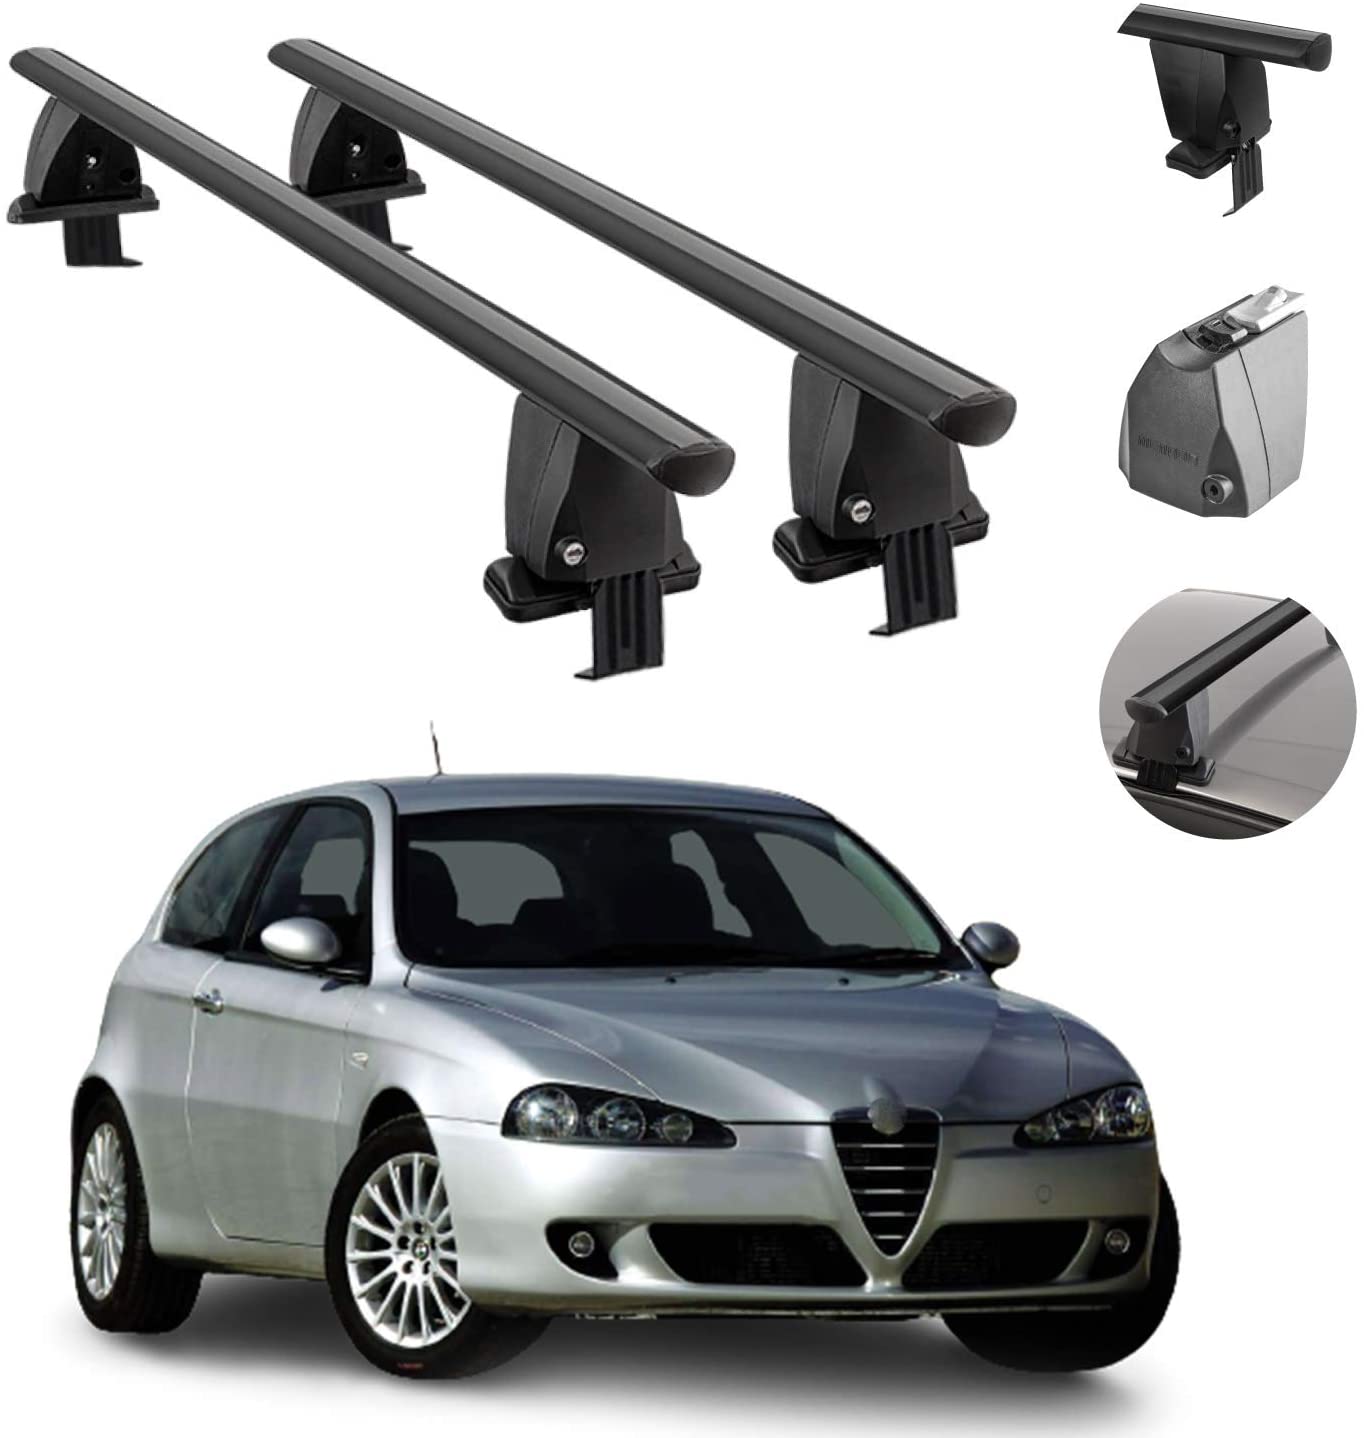 Roof Rack Cross Bars Lockable Luggage Carrier Smooth Roof Cars | Fits Alfa Romeo 147 3Door 2000-2010 Black Aluminum Cargo Carrier Rooftop Bars | Automotive Exterior Accessories